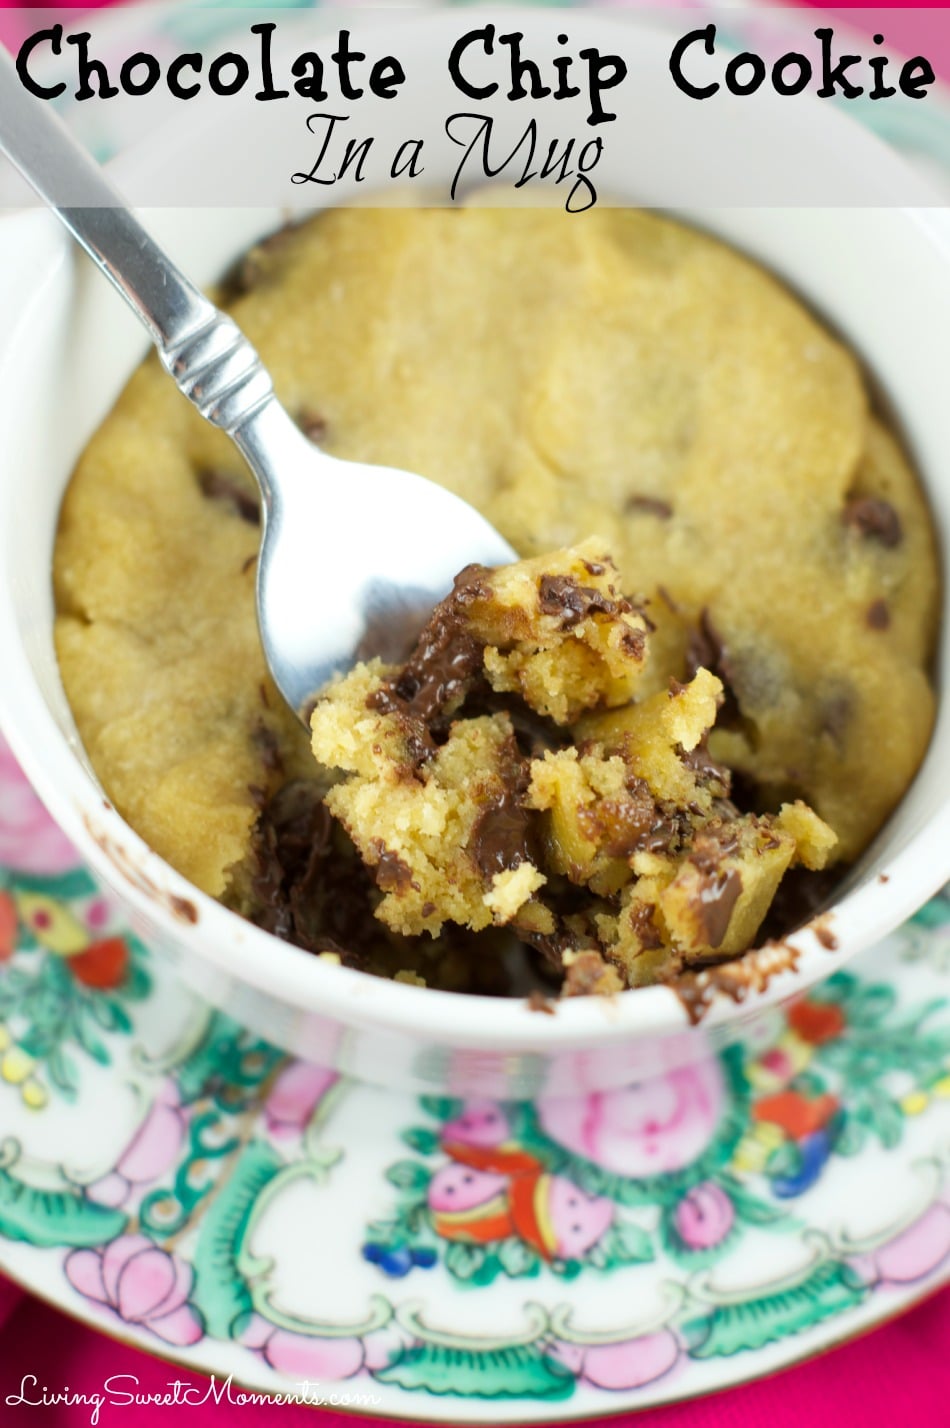 Chocolate Chip Cookies in a mug - Just 45 seconds is all it takes in the microwave to make this fudgy cookie that will just melt in your mouth. The best mug recipe ever! 